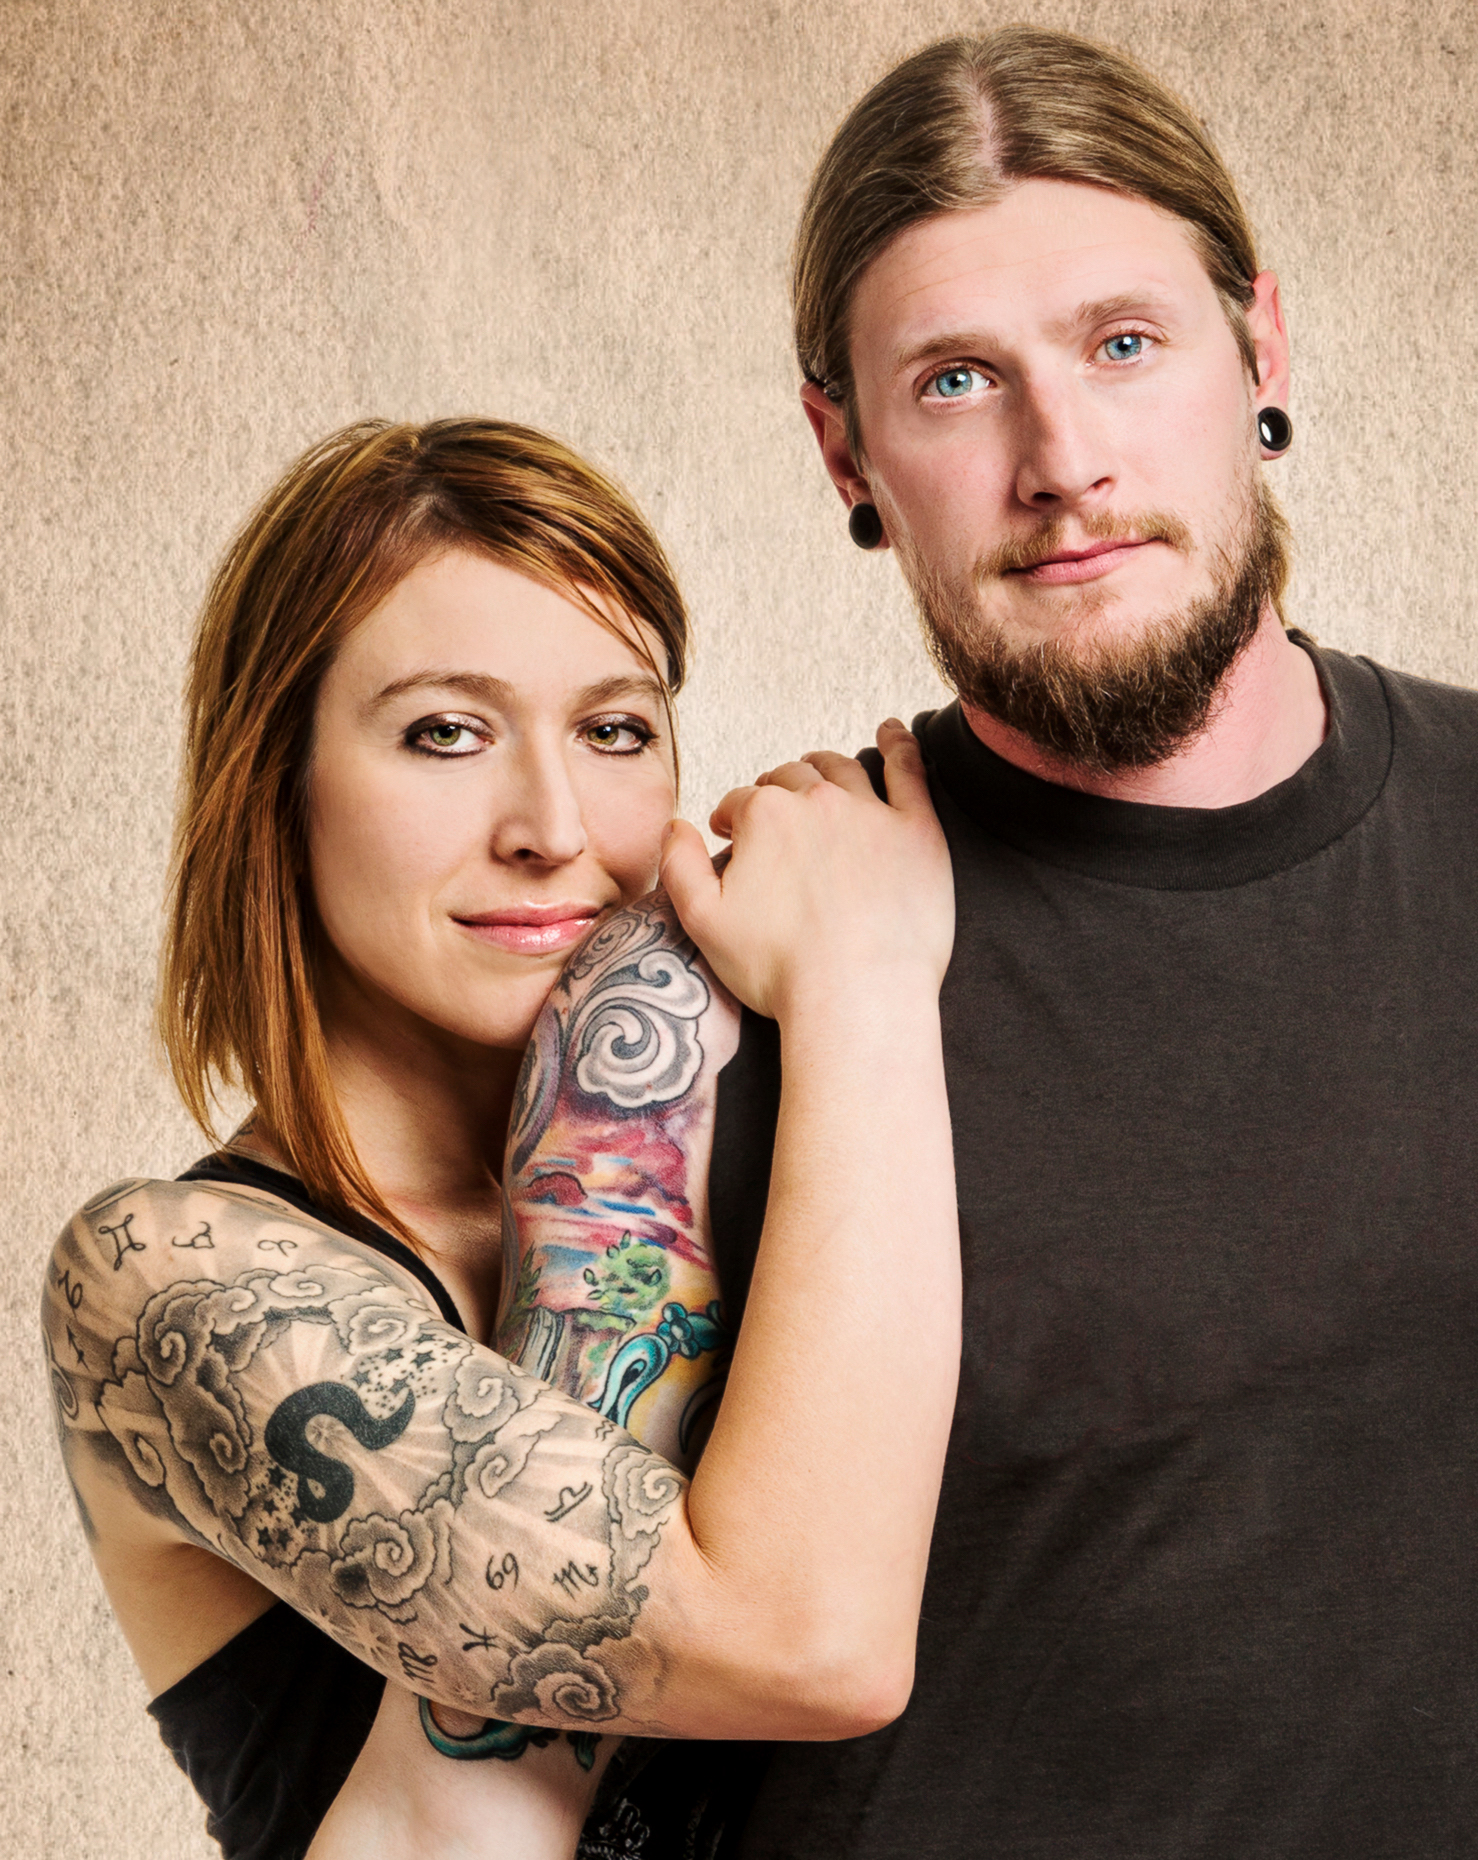 Studio portrait of man and woman with tattoos